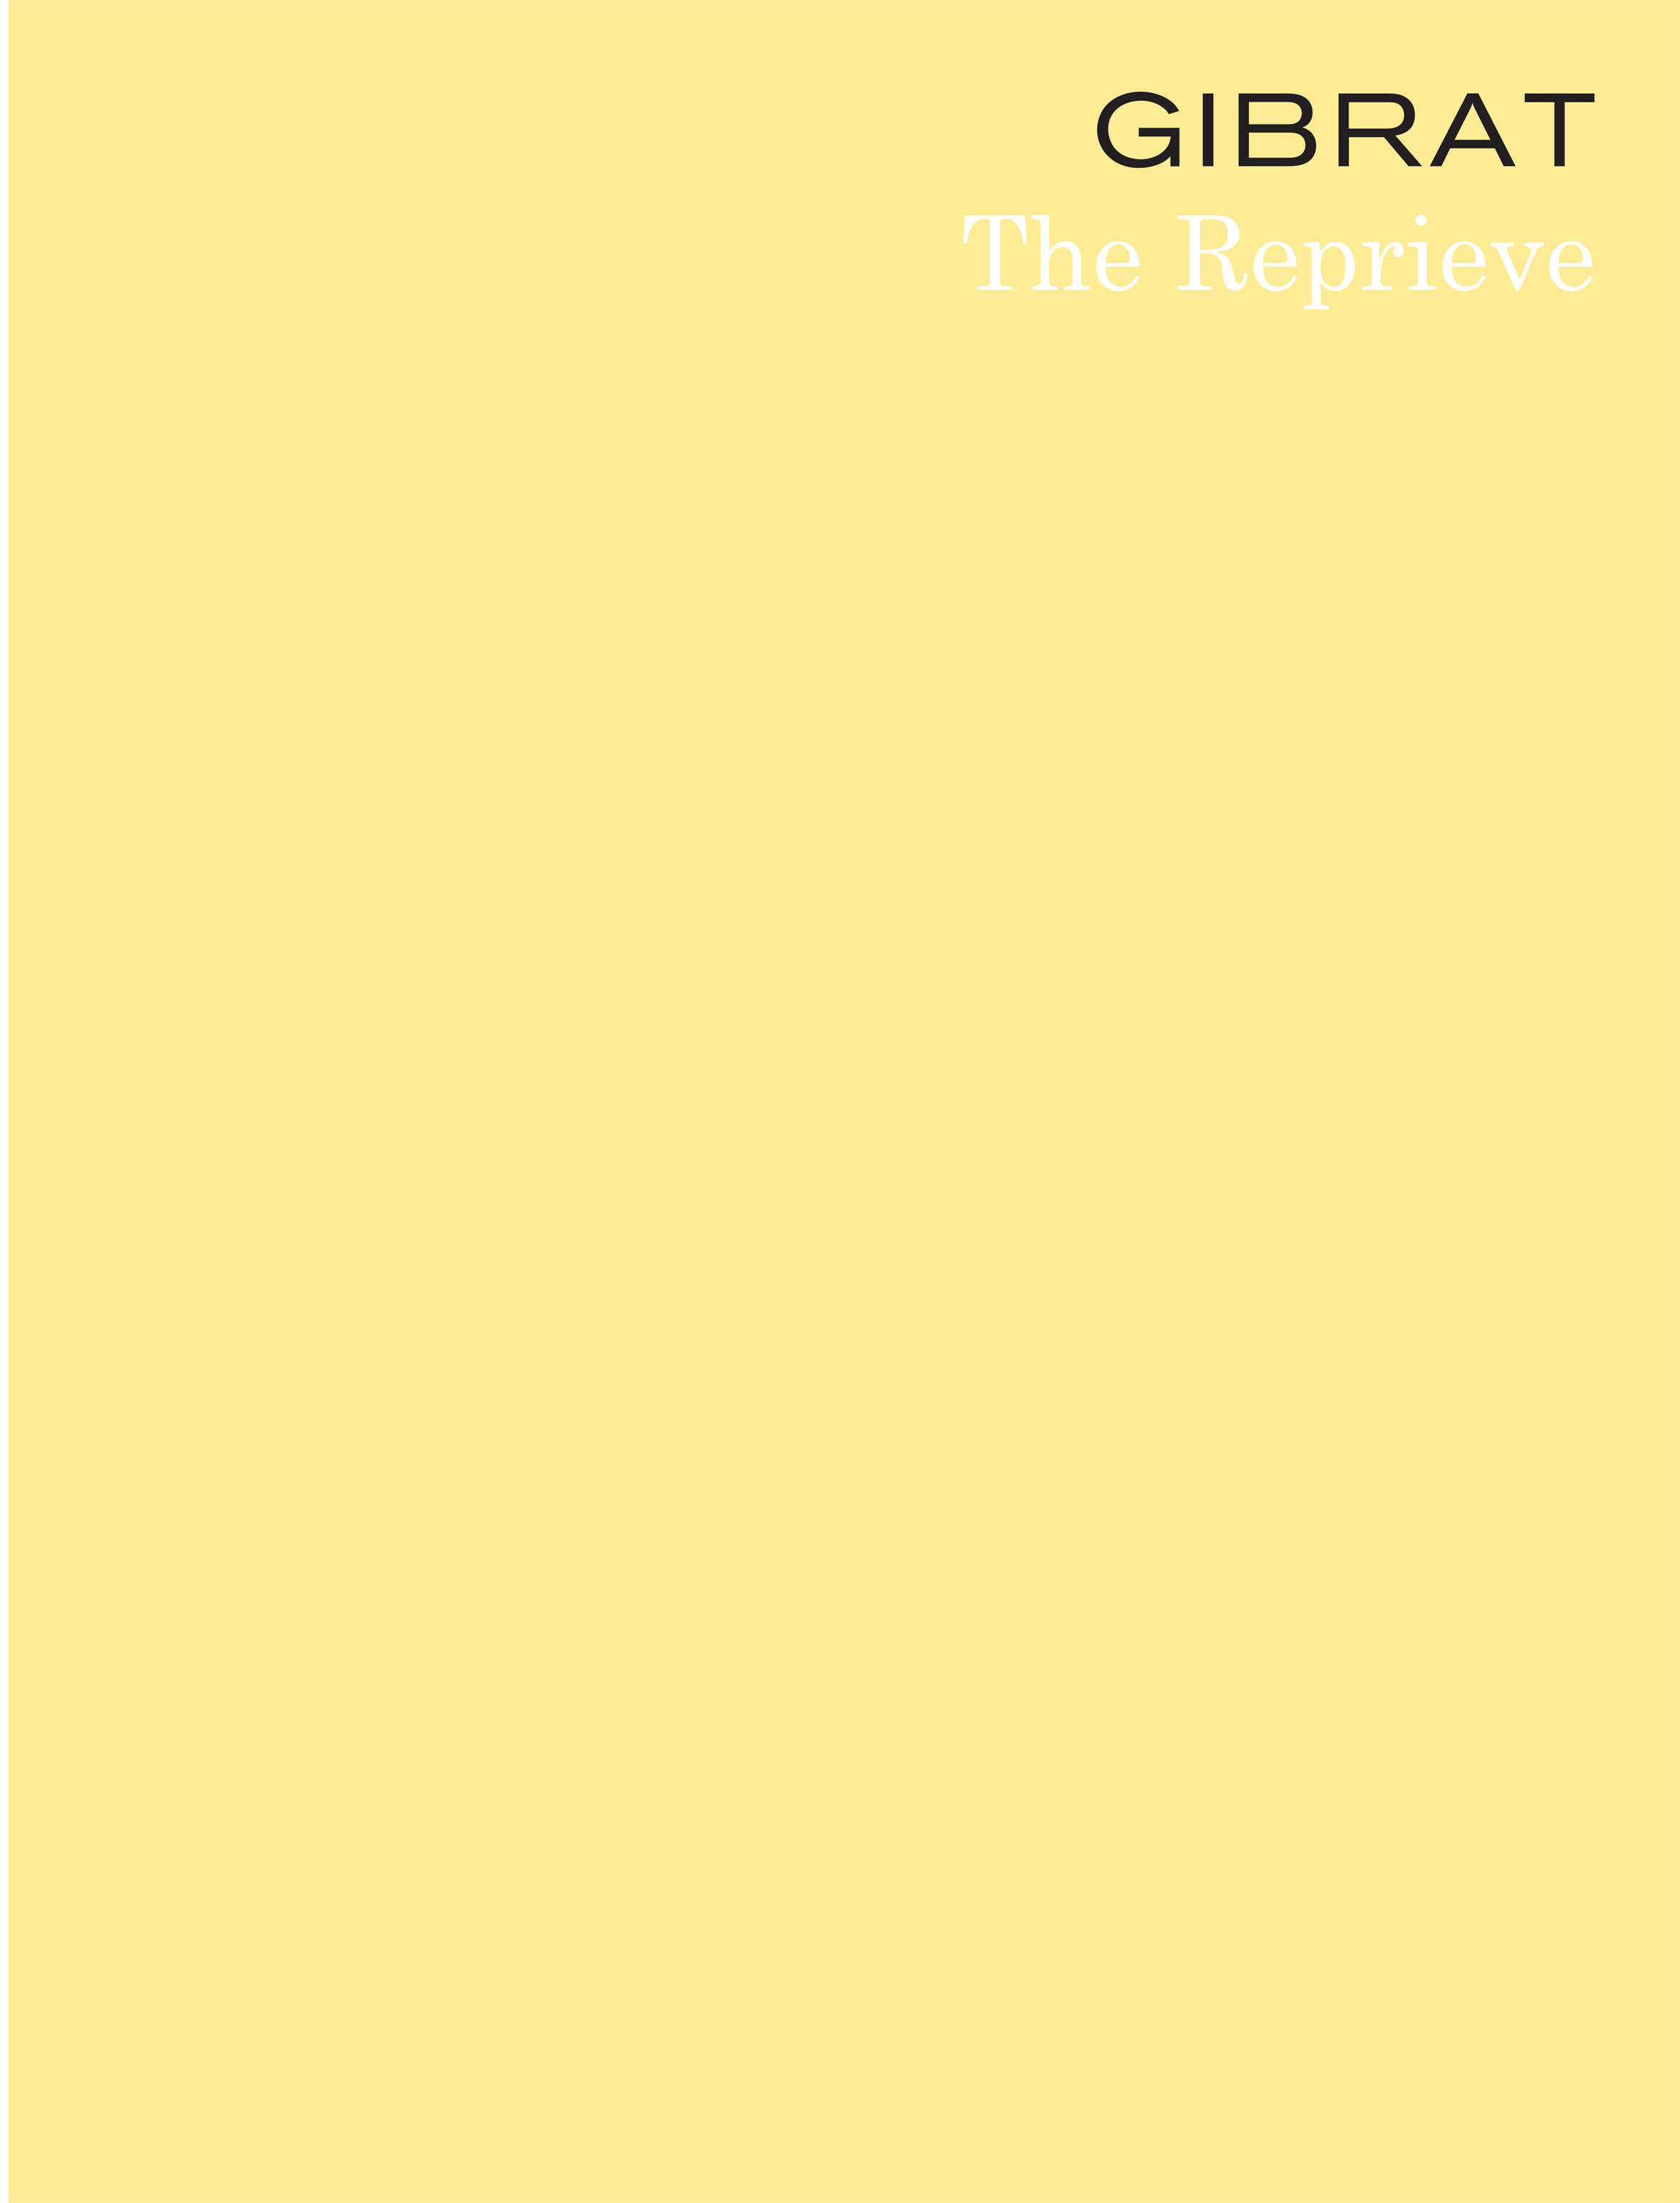 Read online The Reprieve comic -  Issue #1 - 3